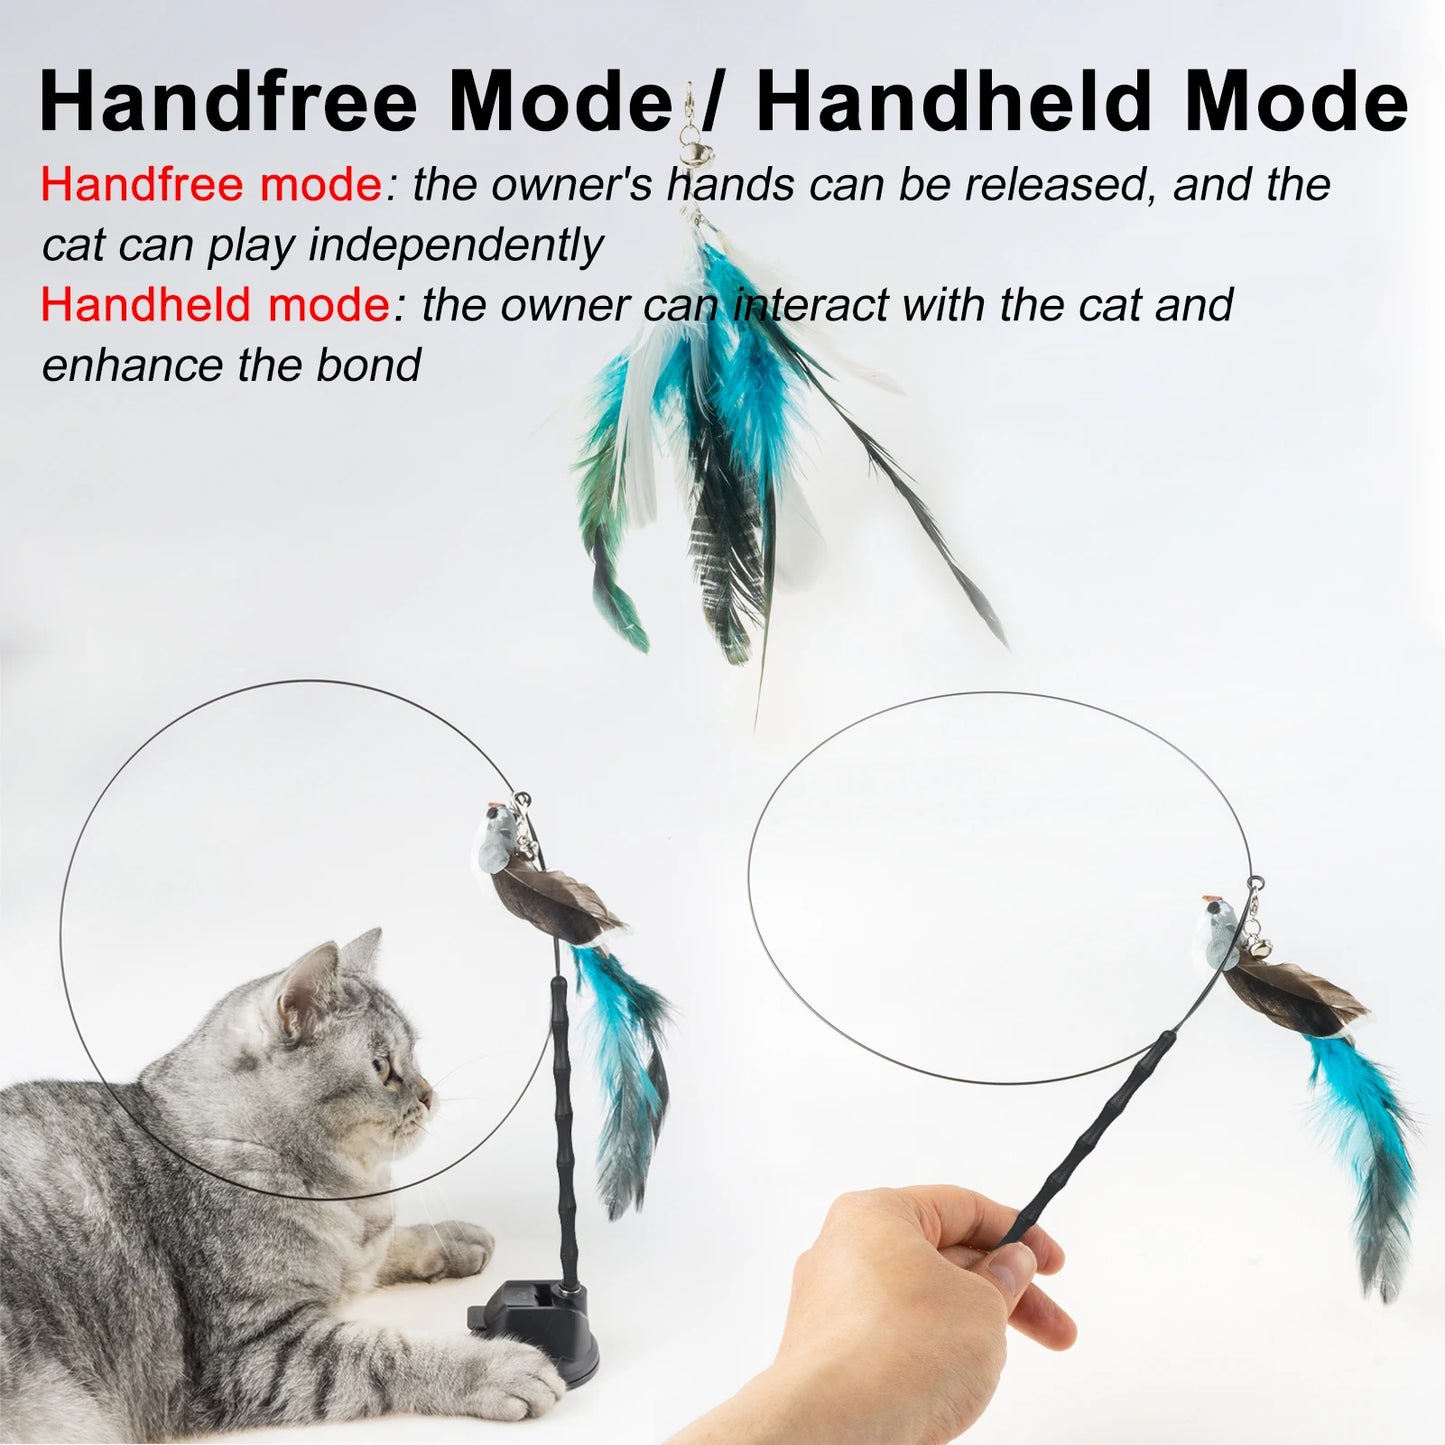 Handfree Bird/Feather Cat Wand with Bell Powerful Suction Cup